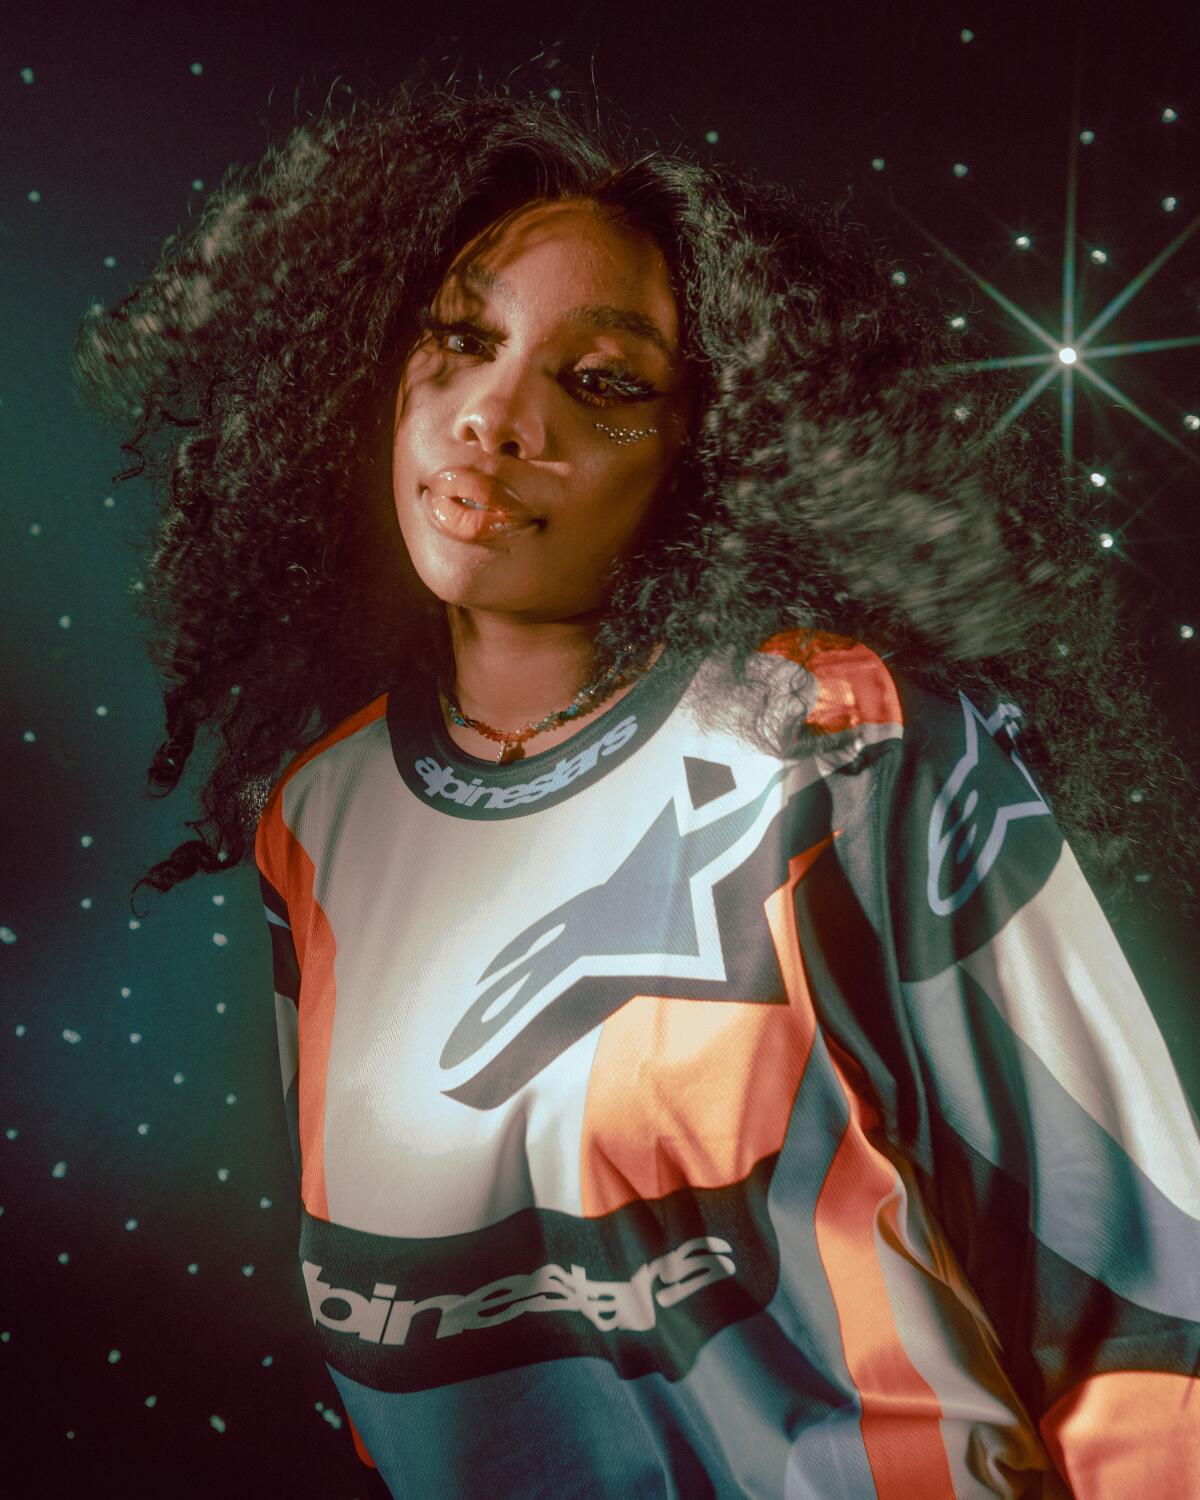 SZA poses in front of a sparkling dark background wearing a colorful jersey